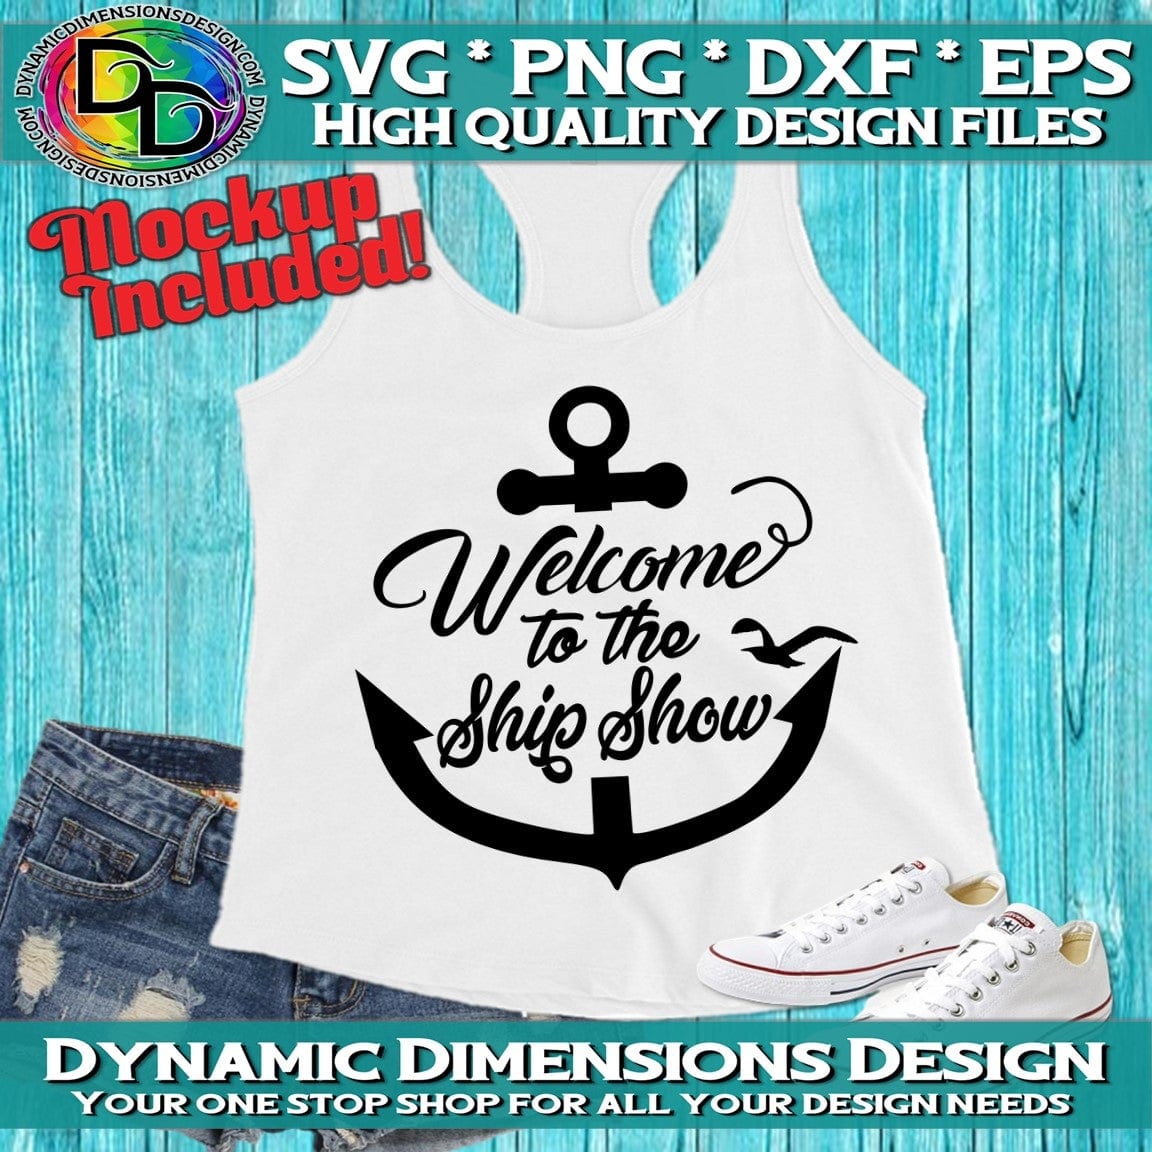 Welcome to the Ship Show svg, png, instant download, dxf, eps, pdf, jpg, cricut, silhouette, sublimtion, printable